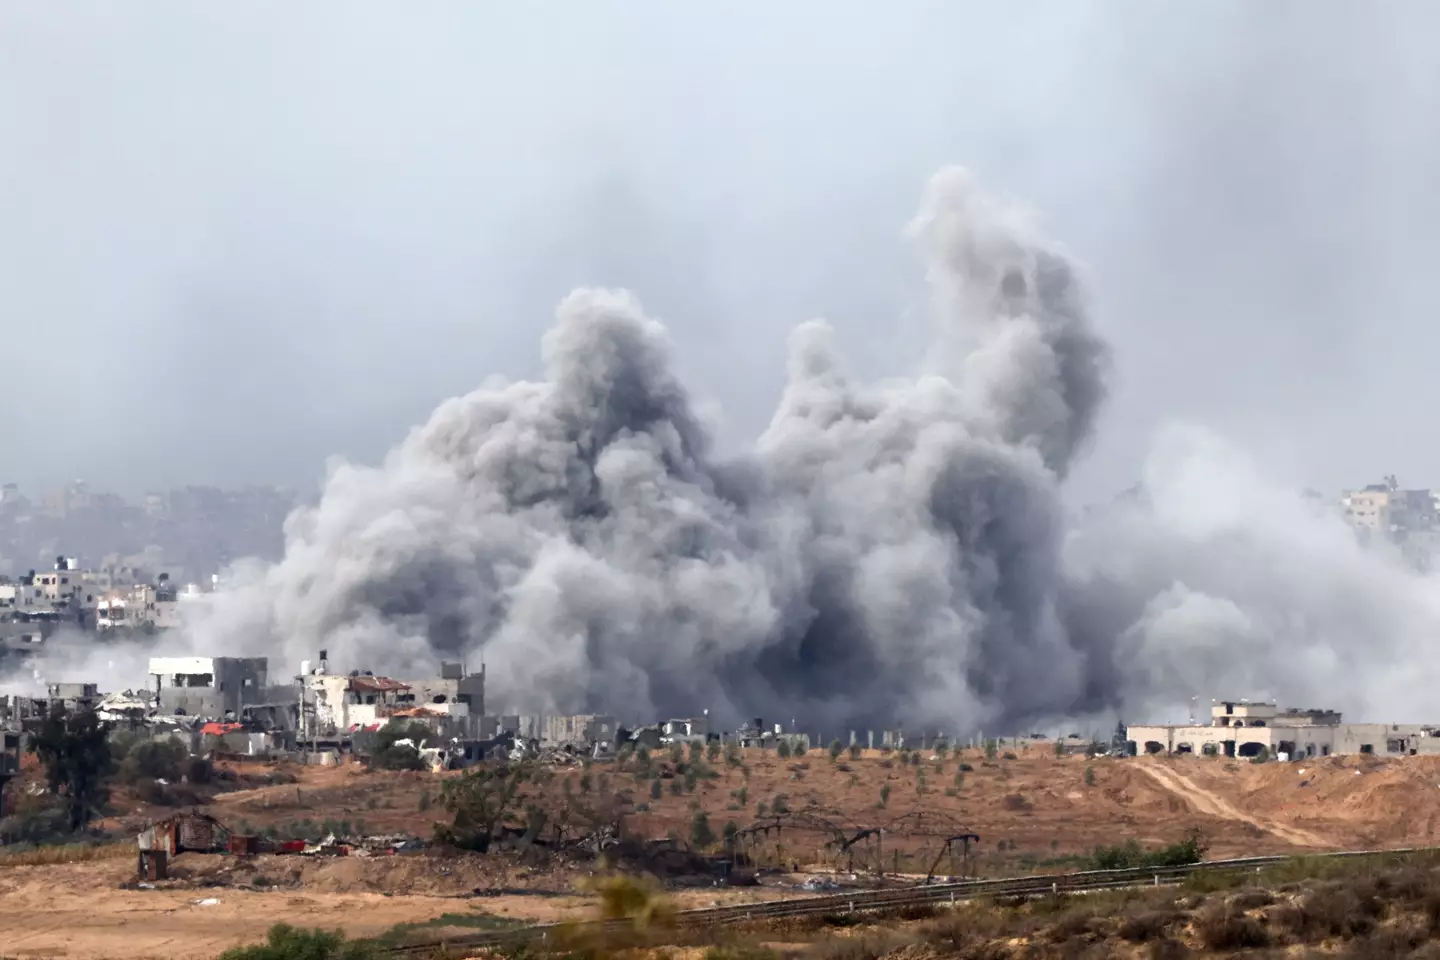 Hamas launched its attack on Israel on 7 October.